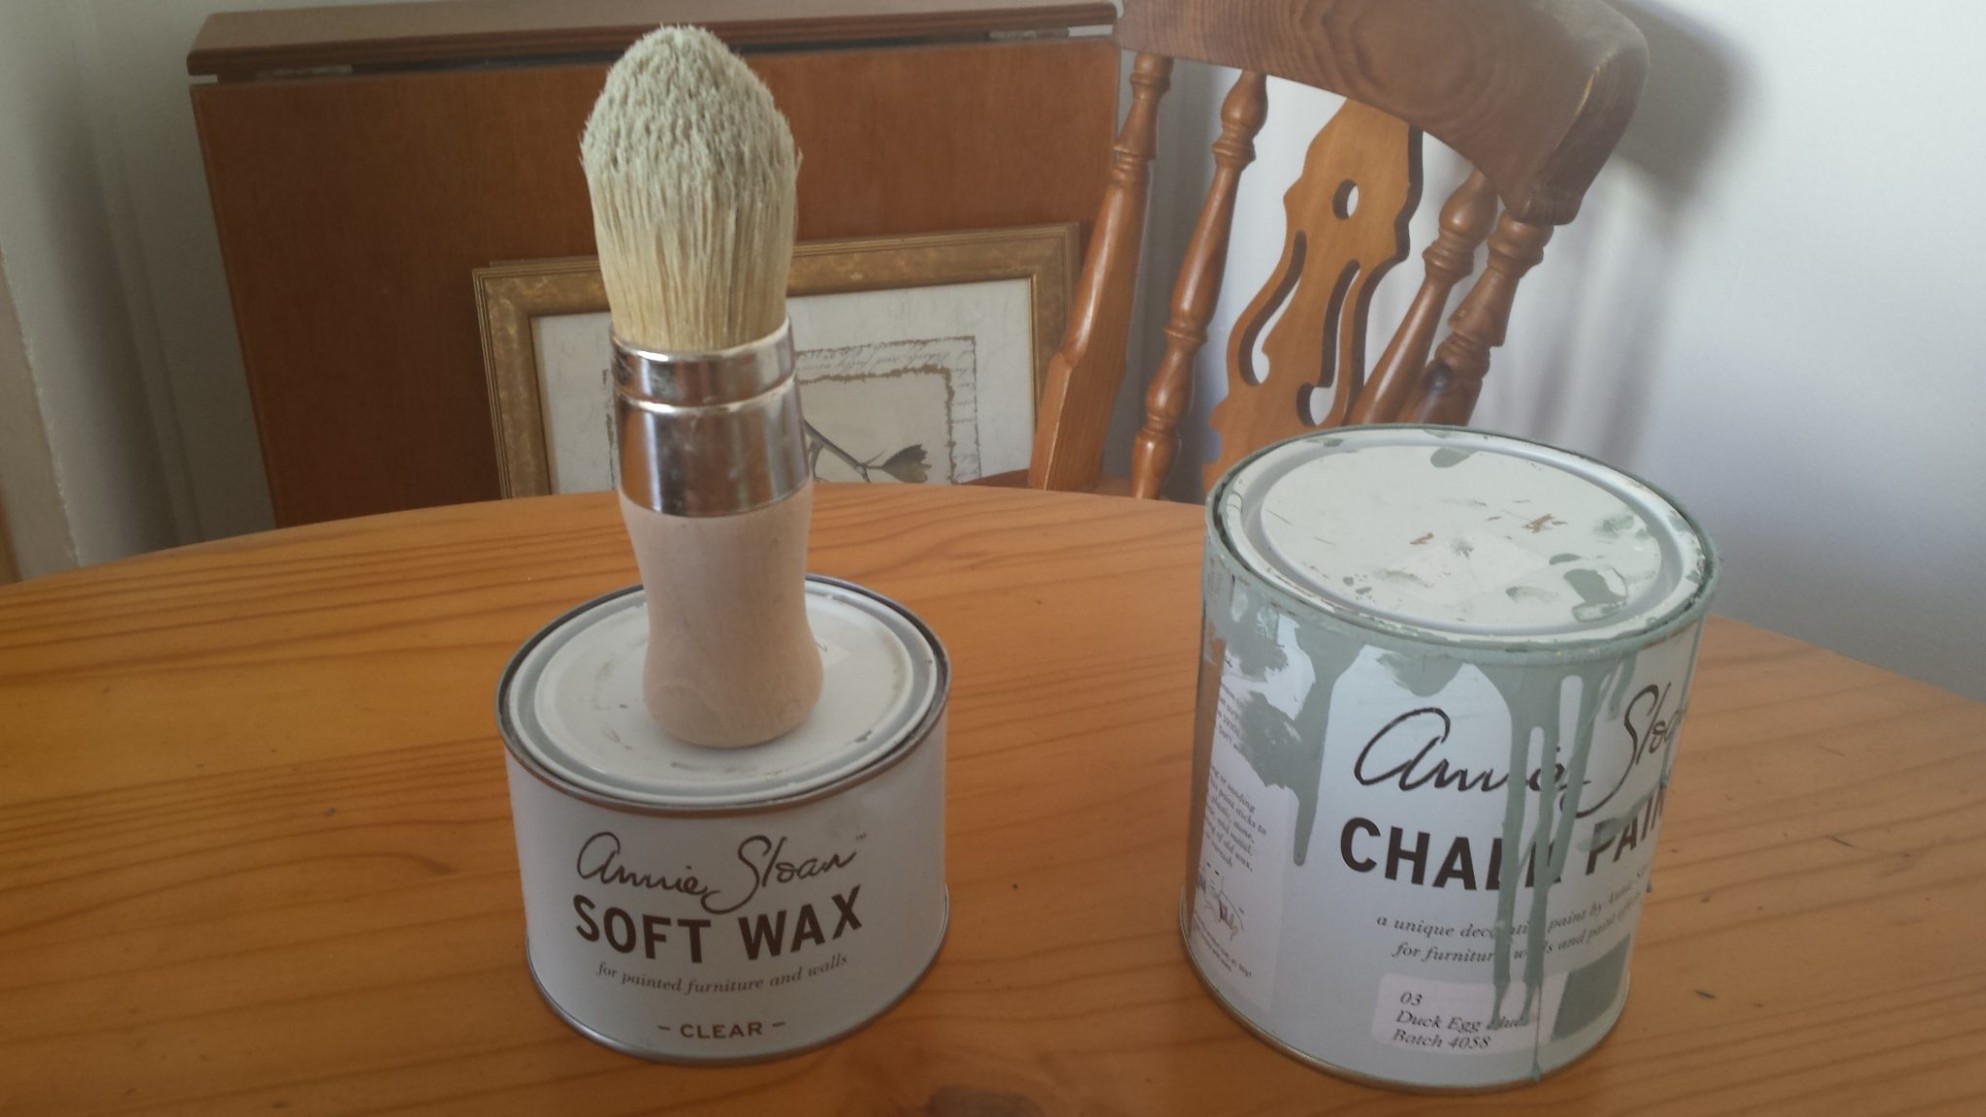 Chalk Paint Up Cycling Furniture Irish Nomad Where To Buy Annie Sloan Chalk Paint In Brisbane